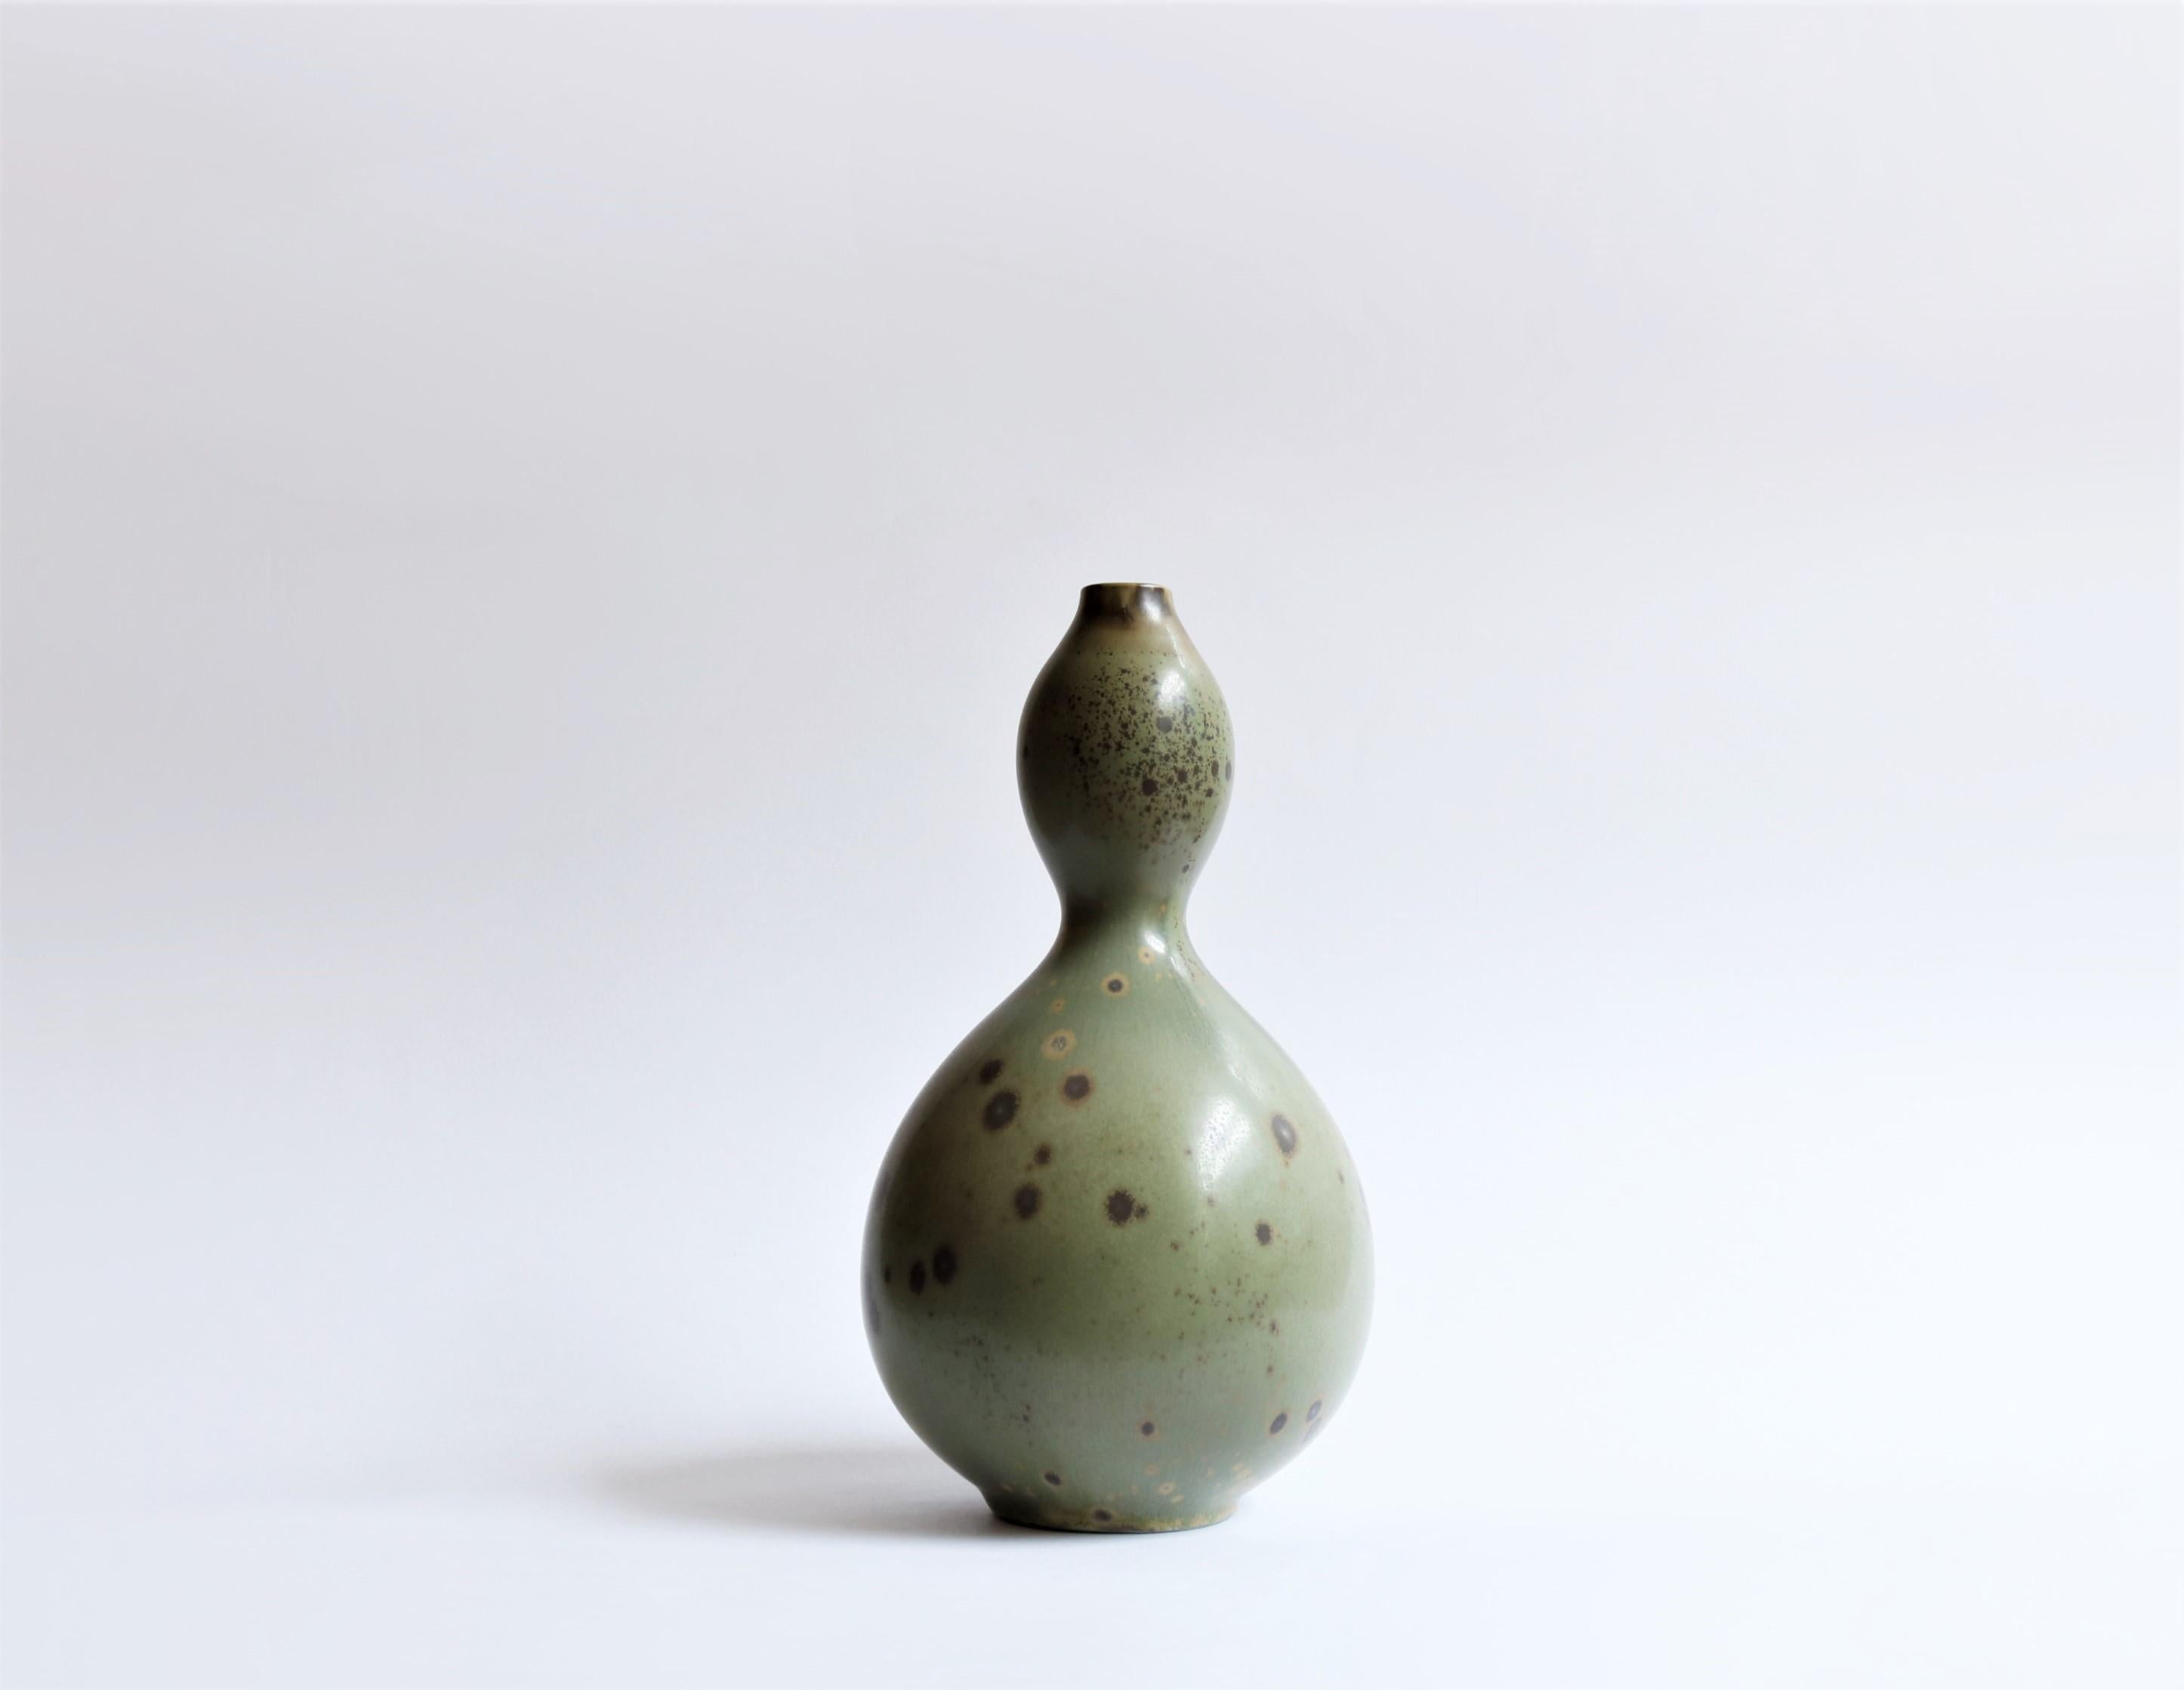 Unique and early gourd-shaped Axel Salto vase from 1945 made at Royal Copenhagen, Denmark. The vessel is decorated with a stunning green bird´s egg glaze.